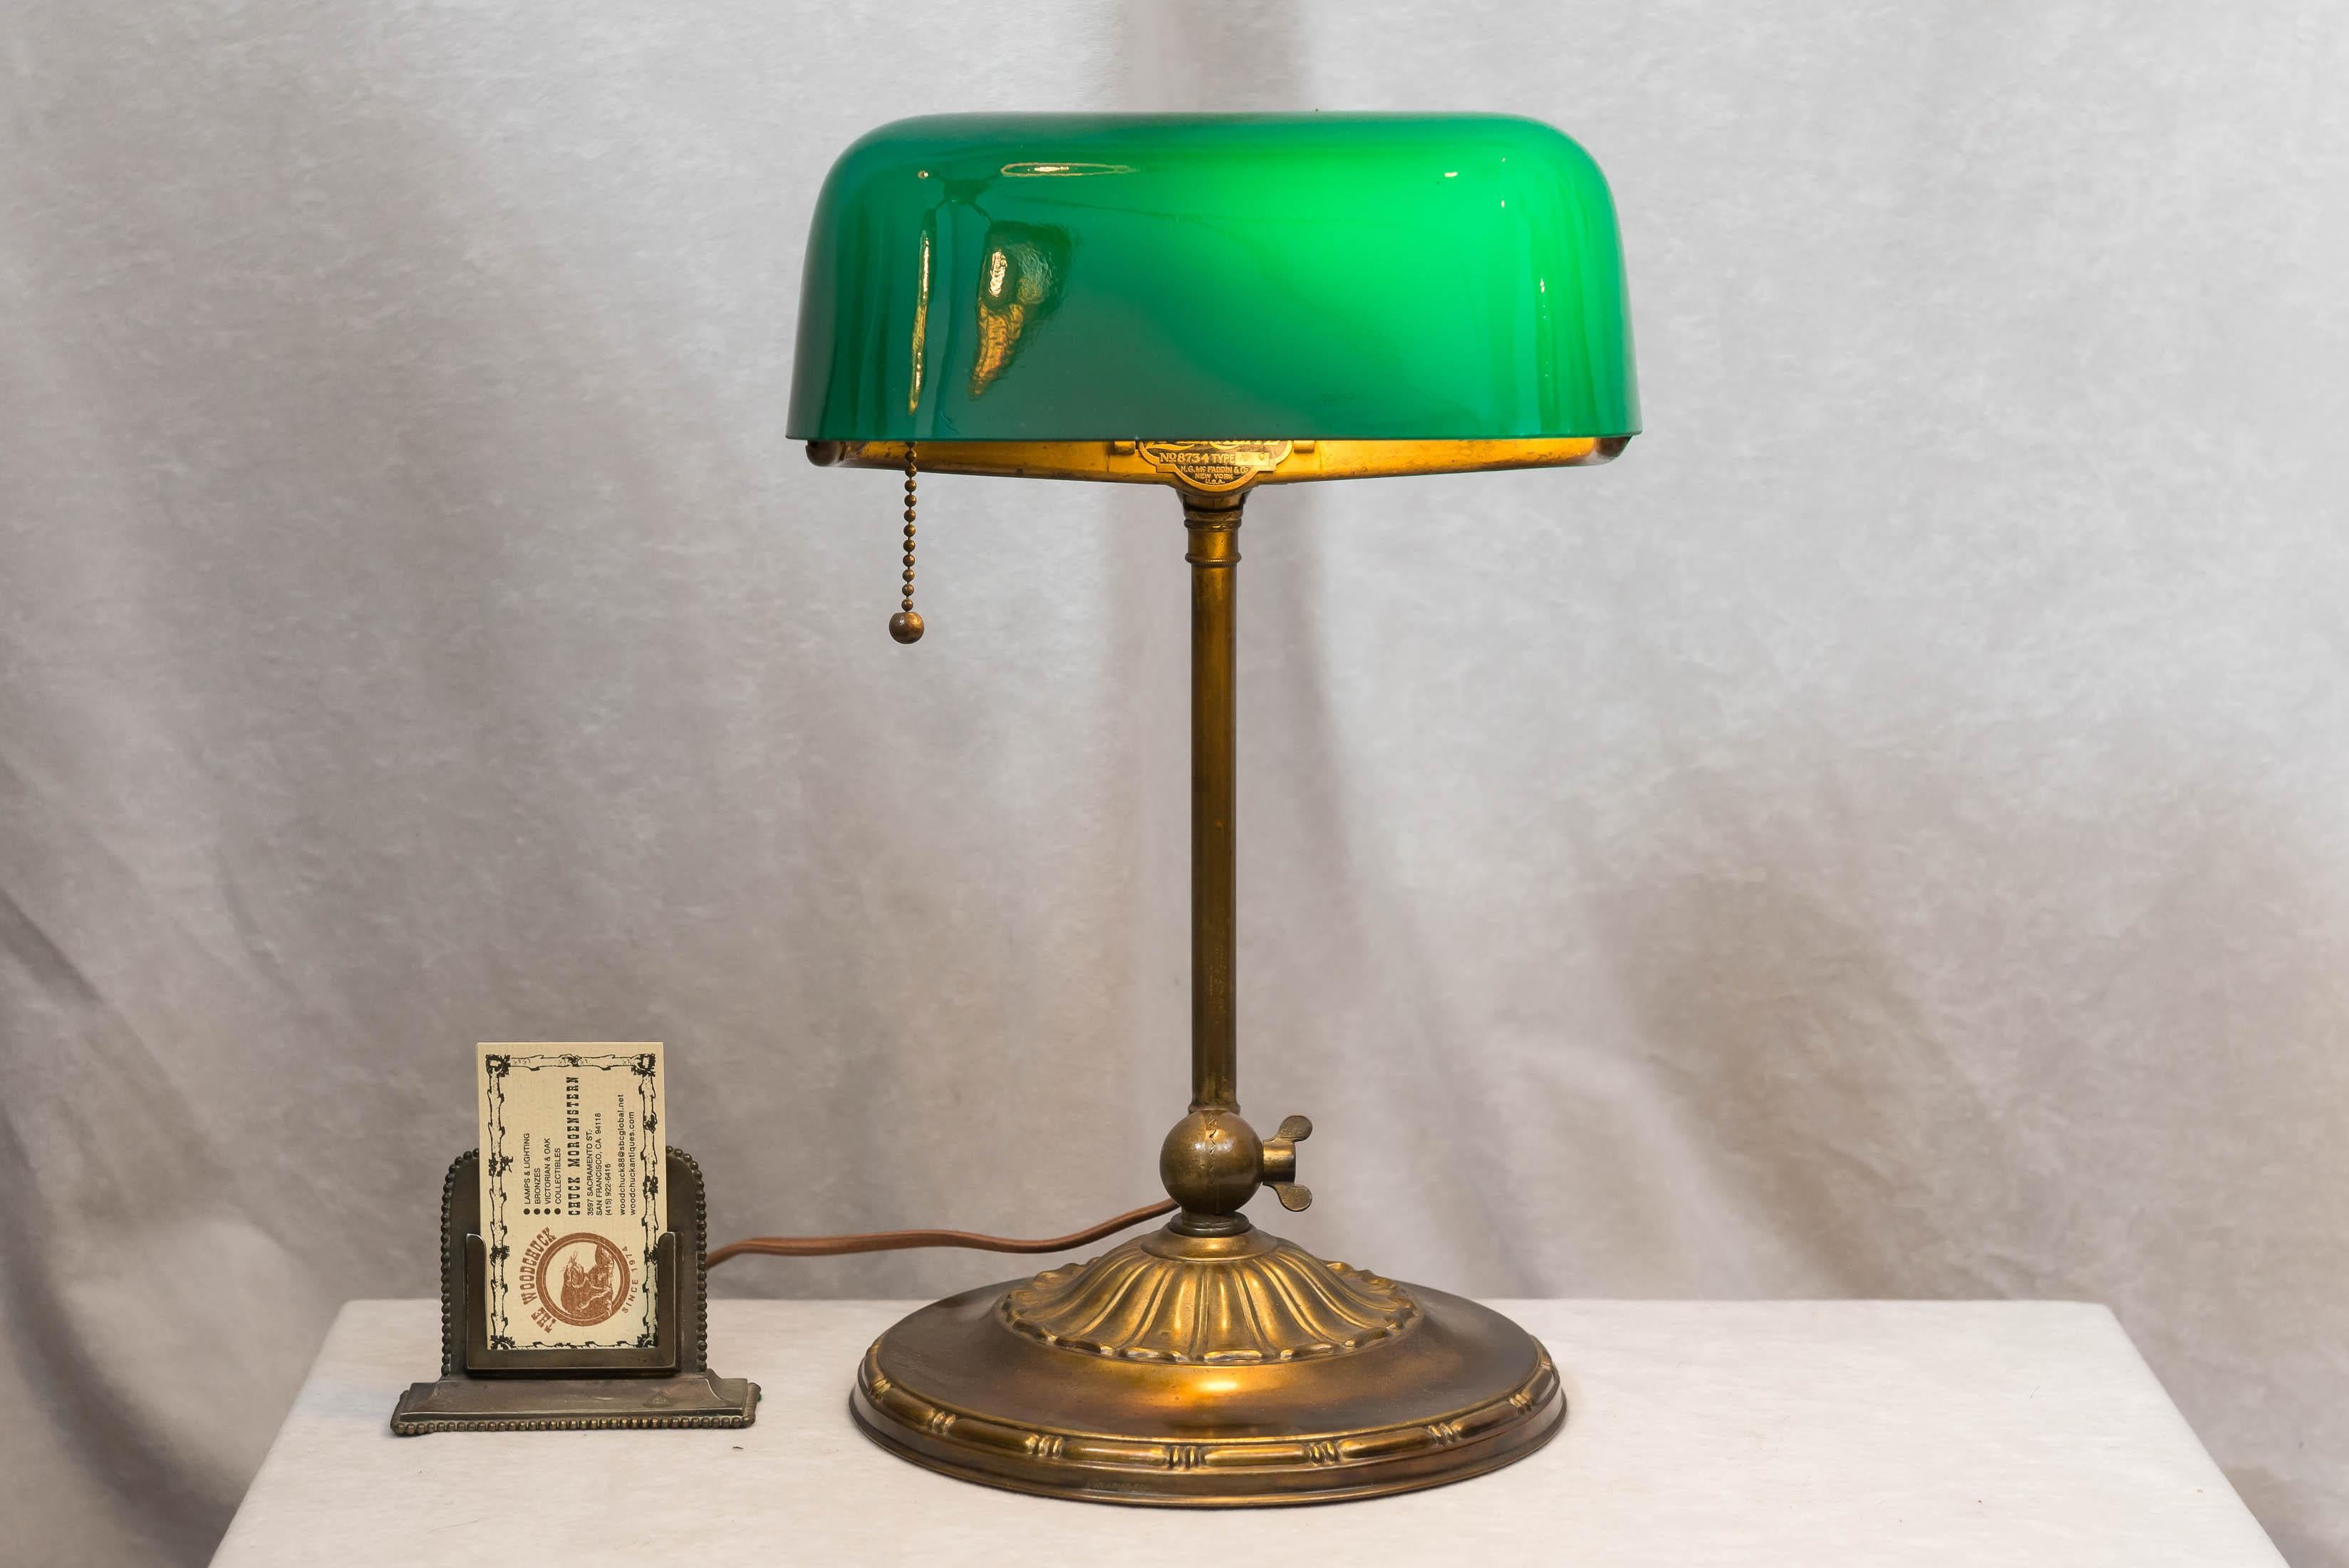 These Banker's lamps are one of our best selling items, when we can get them undamaged and with the original shade. The model was manufactured by the most well-known producer of these lamps, Emeralite. Signed on the shade and base, and having the